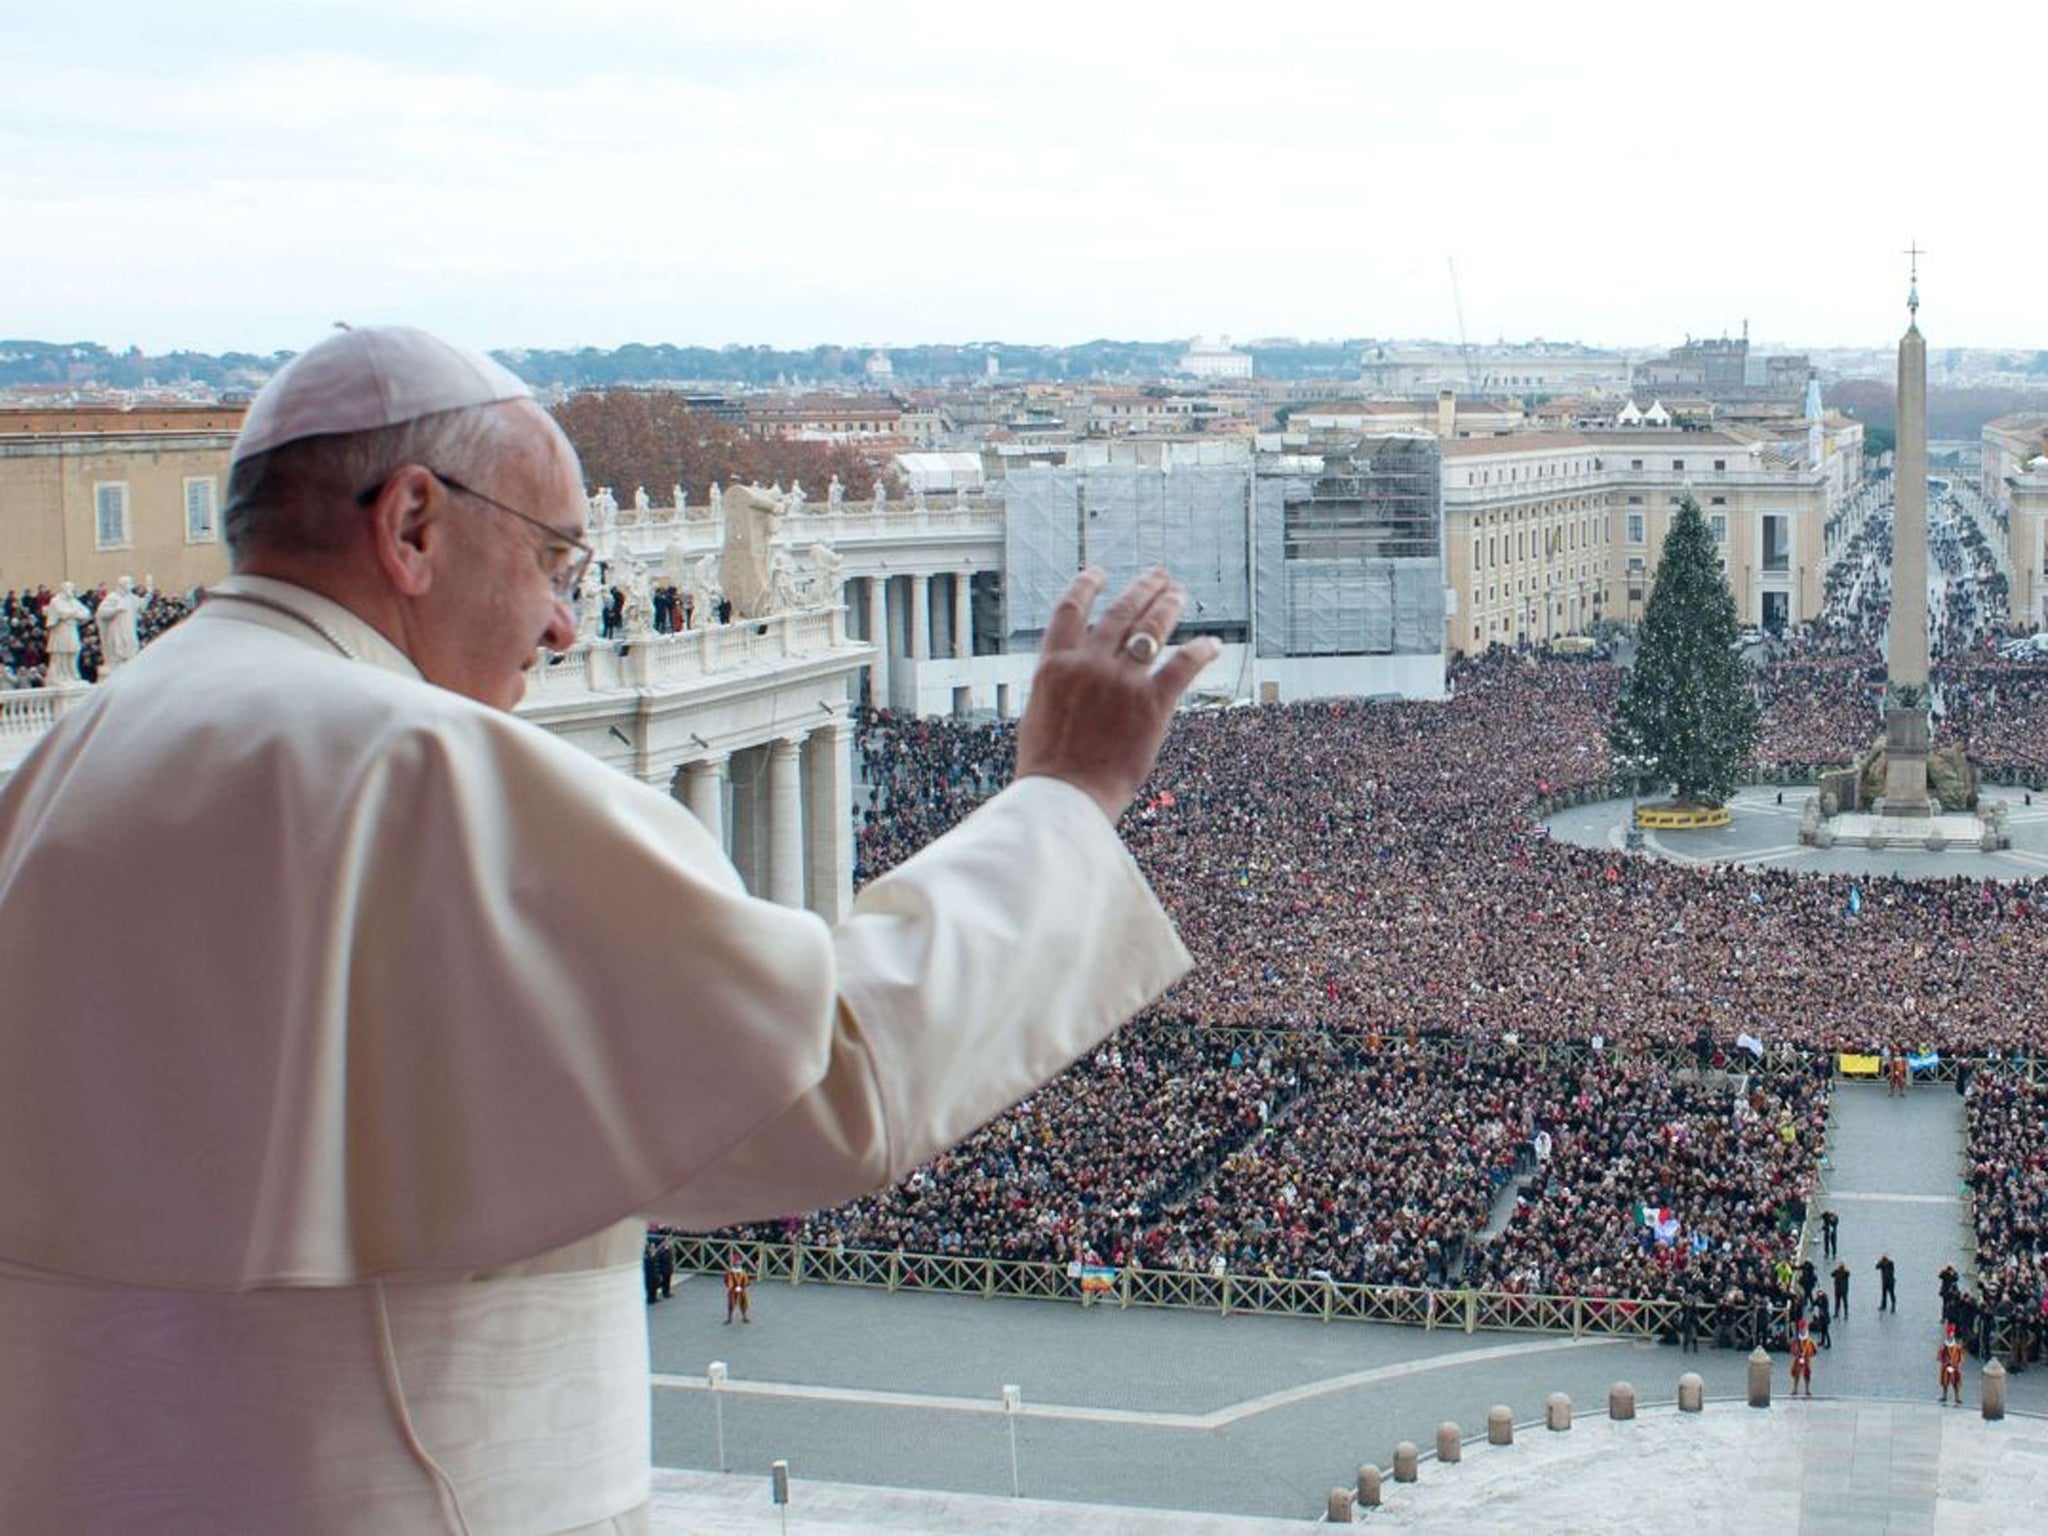 Pope Francis delivers his first 'Urbi et Orbi' (to the city and world) message from the balcony overlooking St. Peter's Square at the Vatican